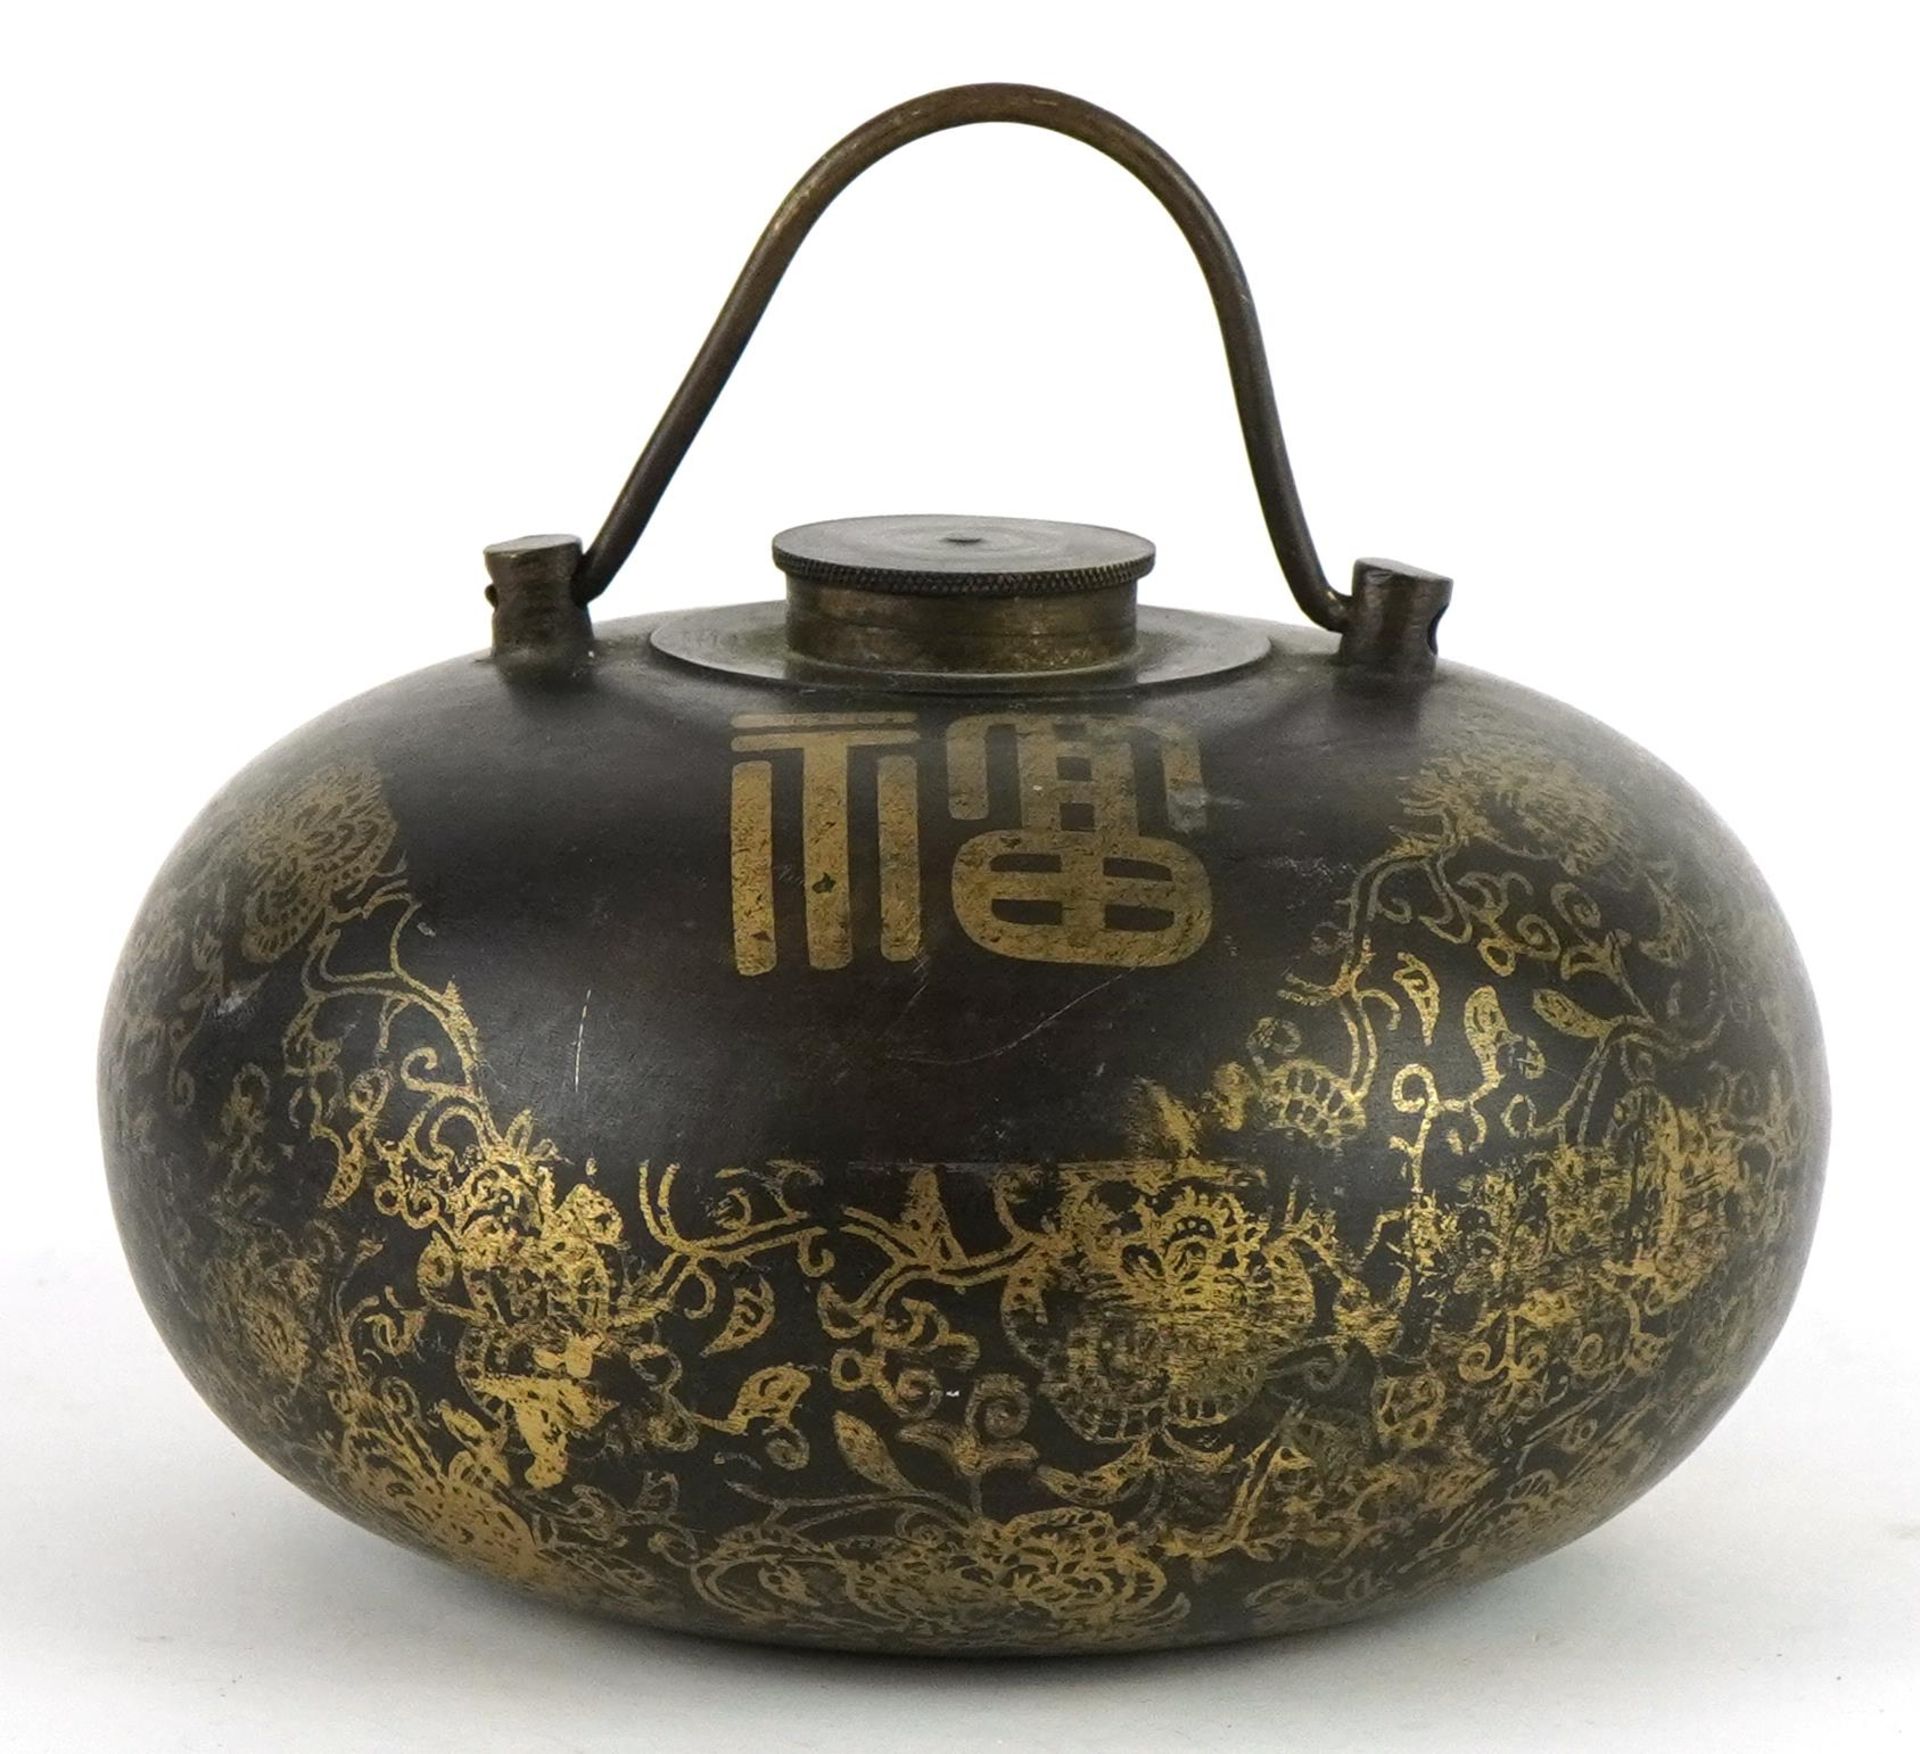 Chinese partially gilt bronzed vessel, 12.5cm in diameter : For further information on this lot